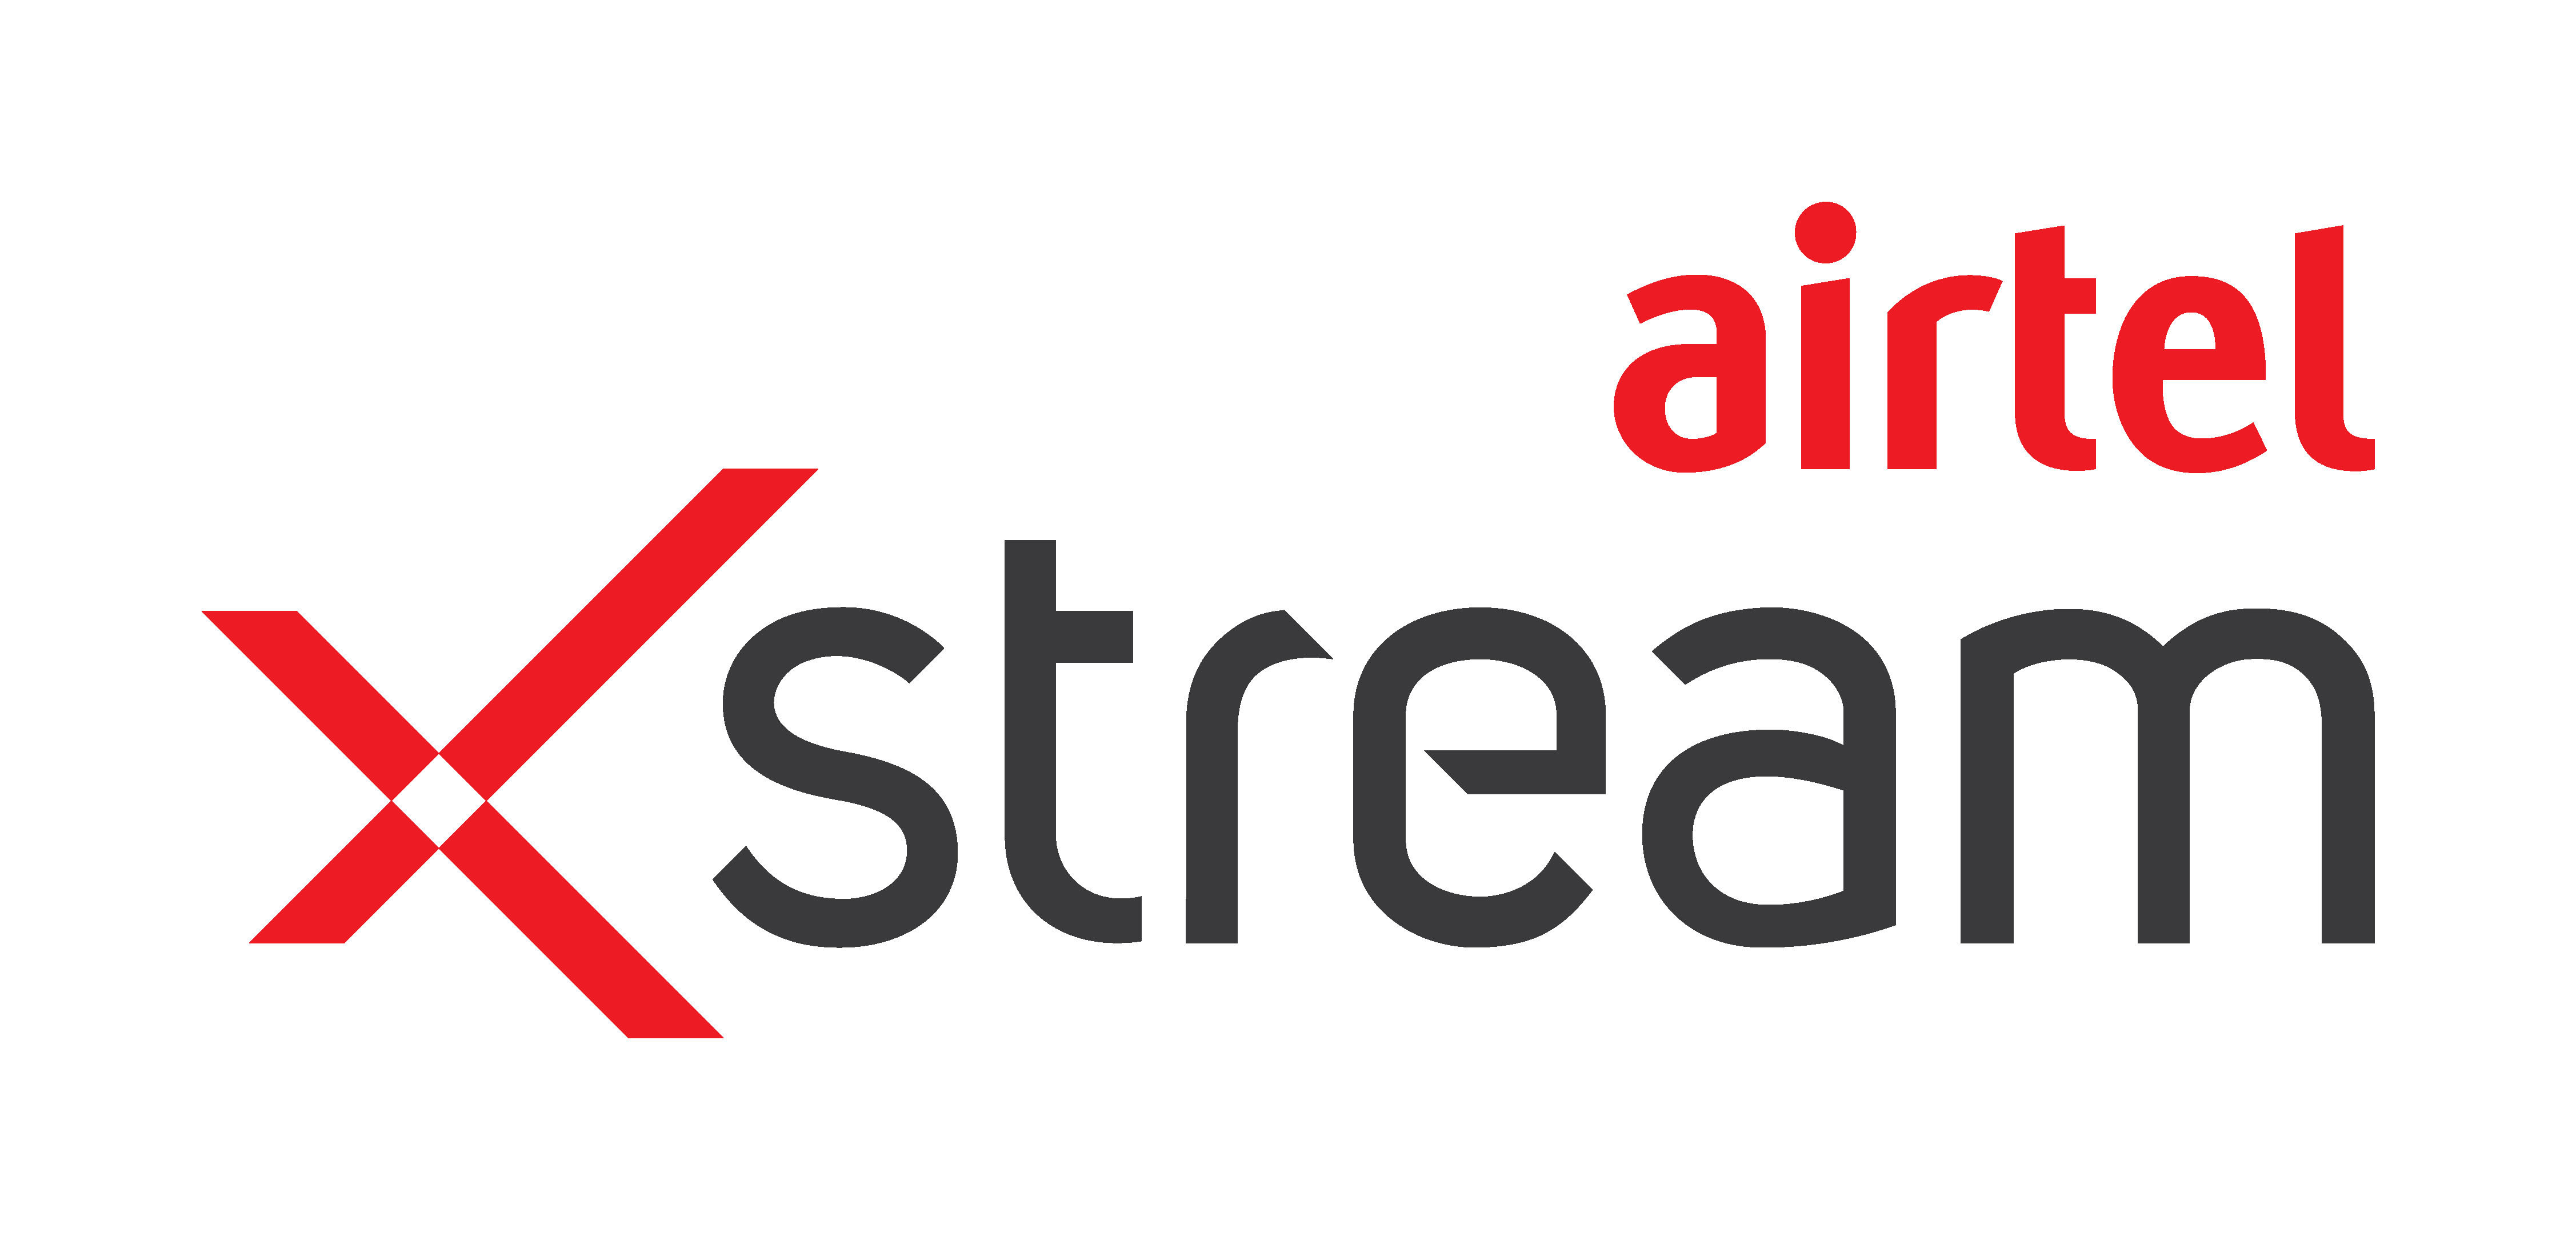 Xstream accessible for non Airtel users